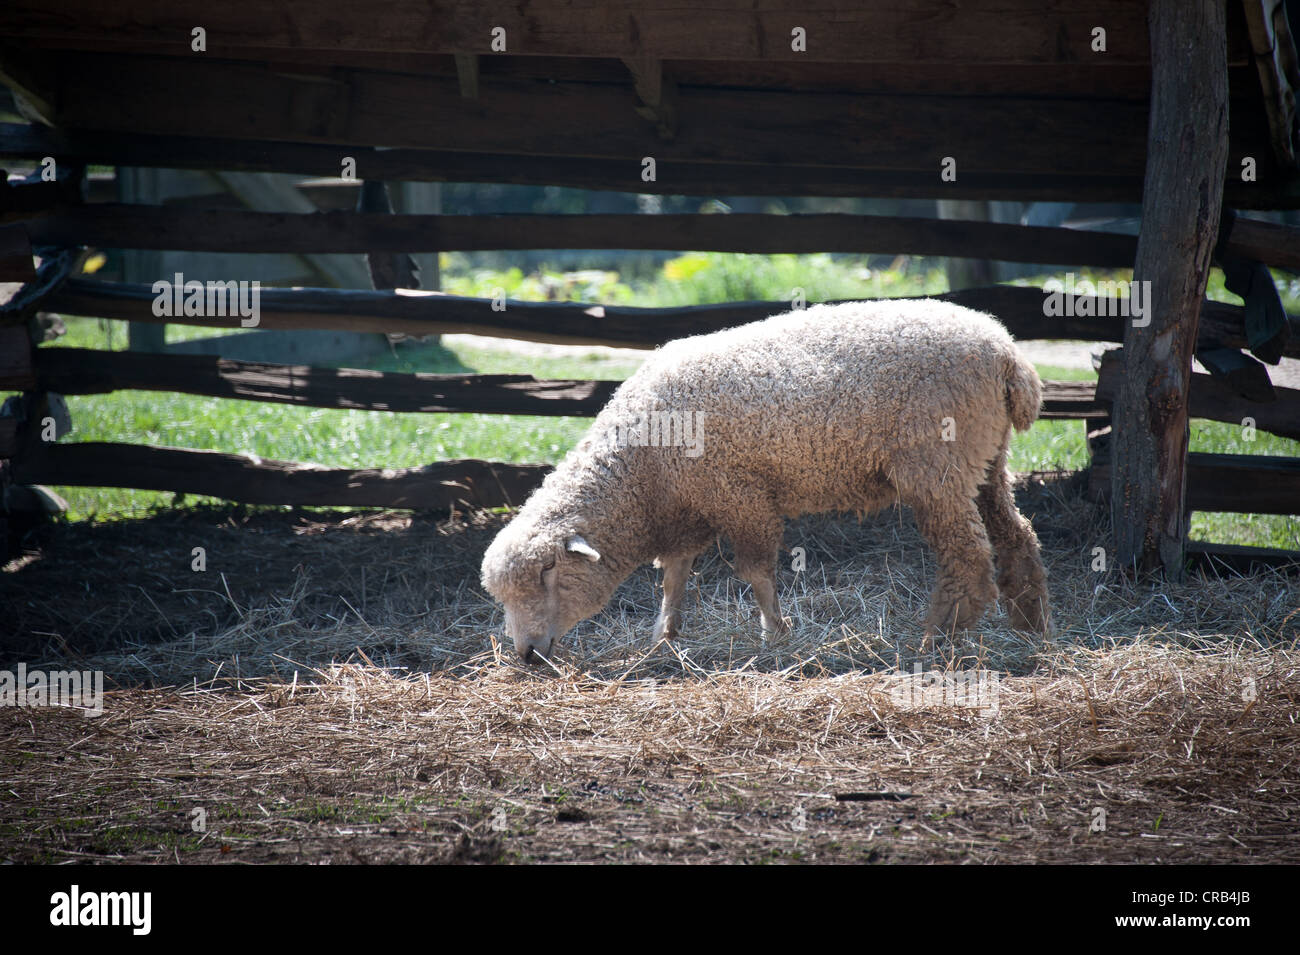 Sheep grazing straw laid in a pen Stock Photo